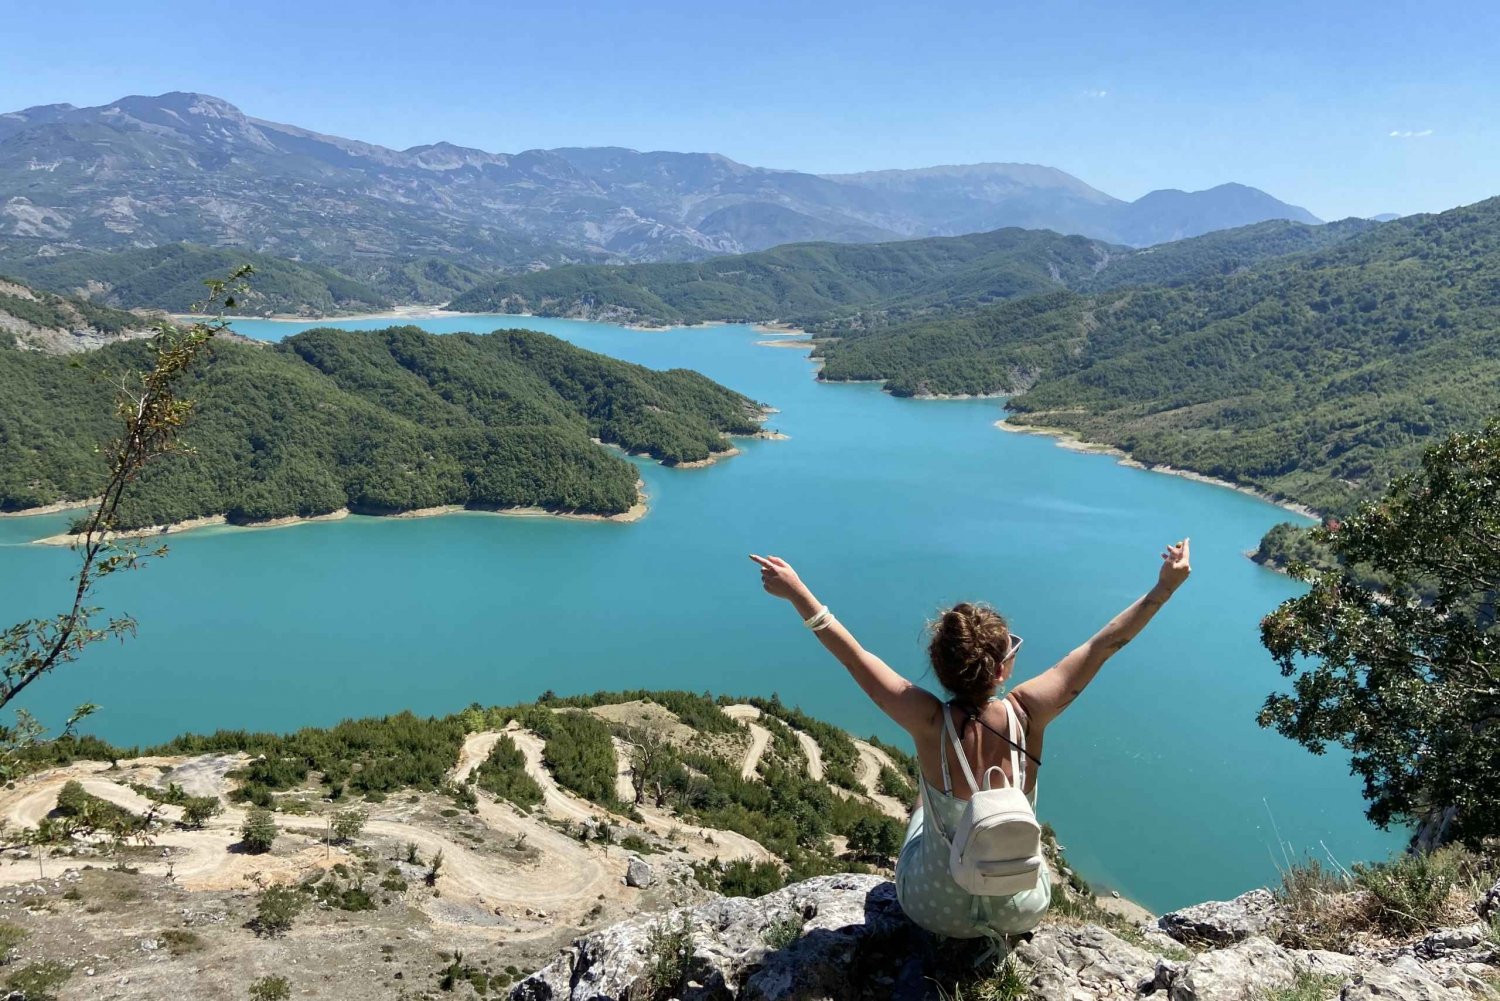 From Durres: Hike to Gamti Mountain with Bovilla lake view